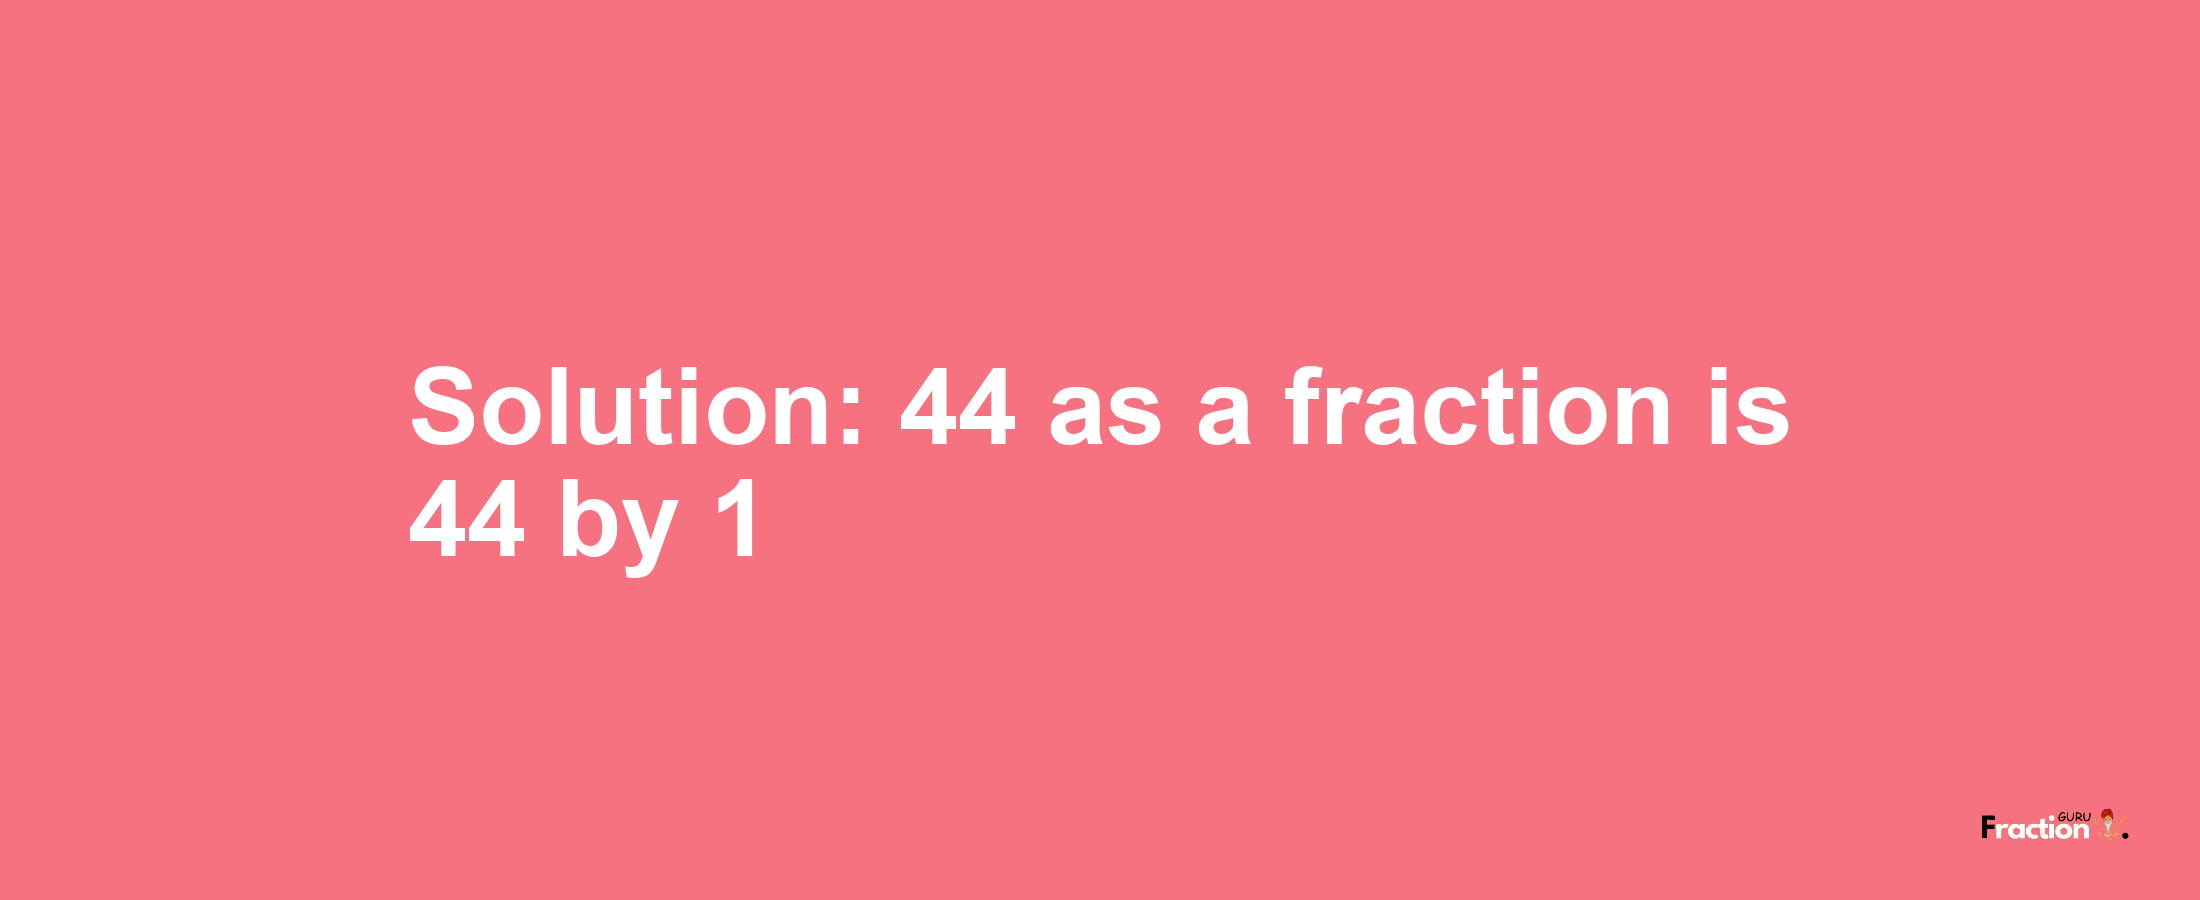 Solution:44 as a fraction is 44/1